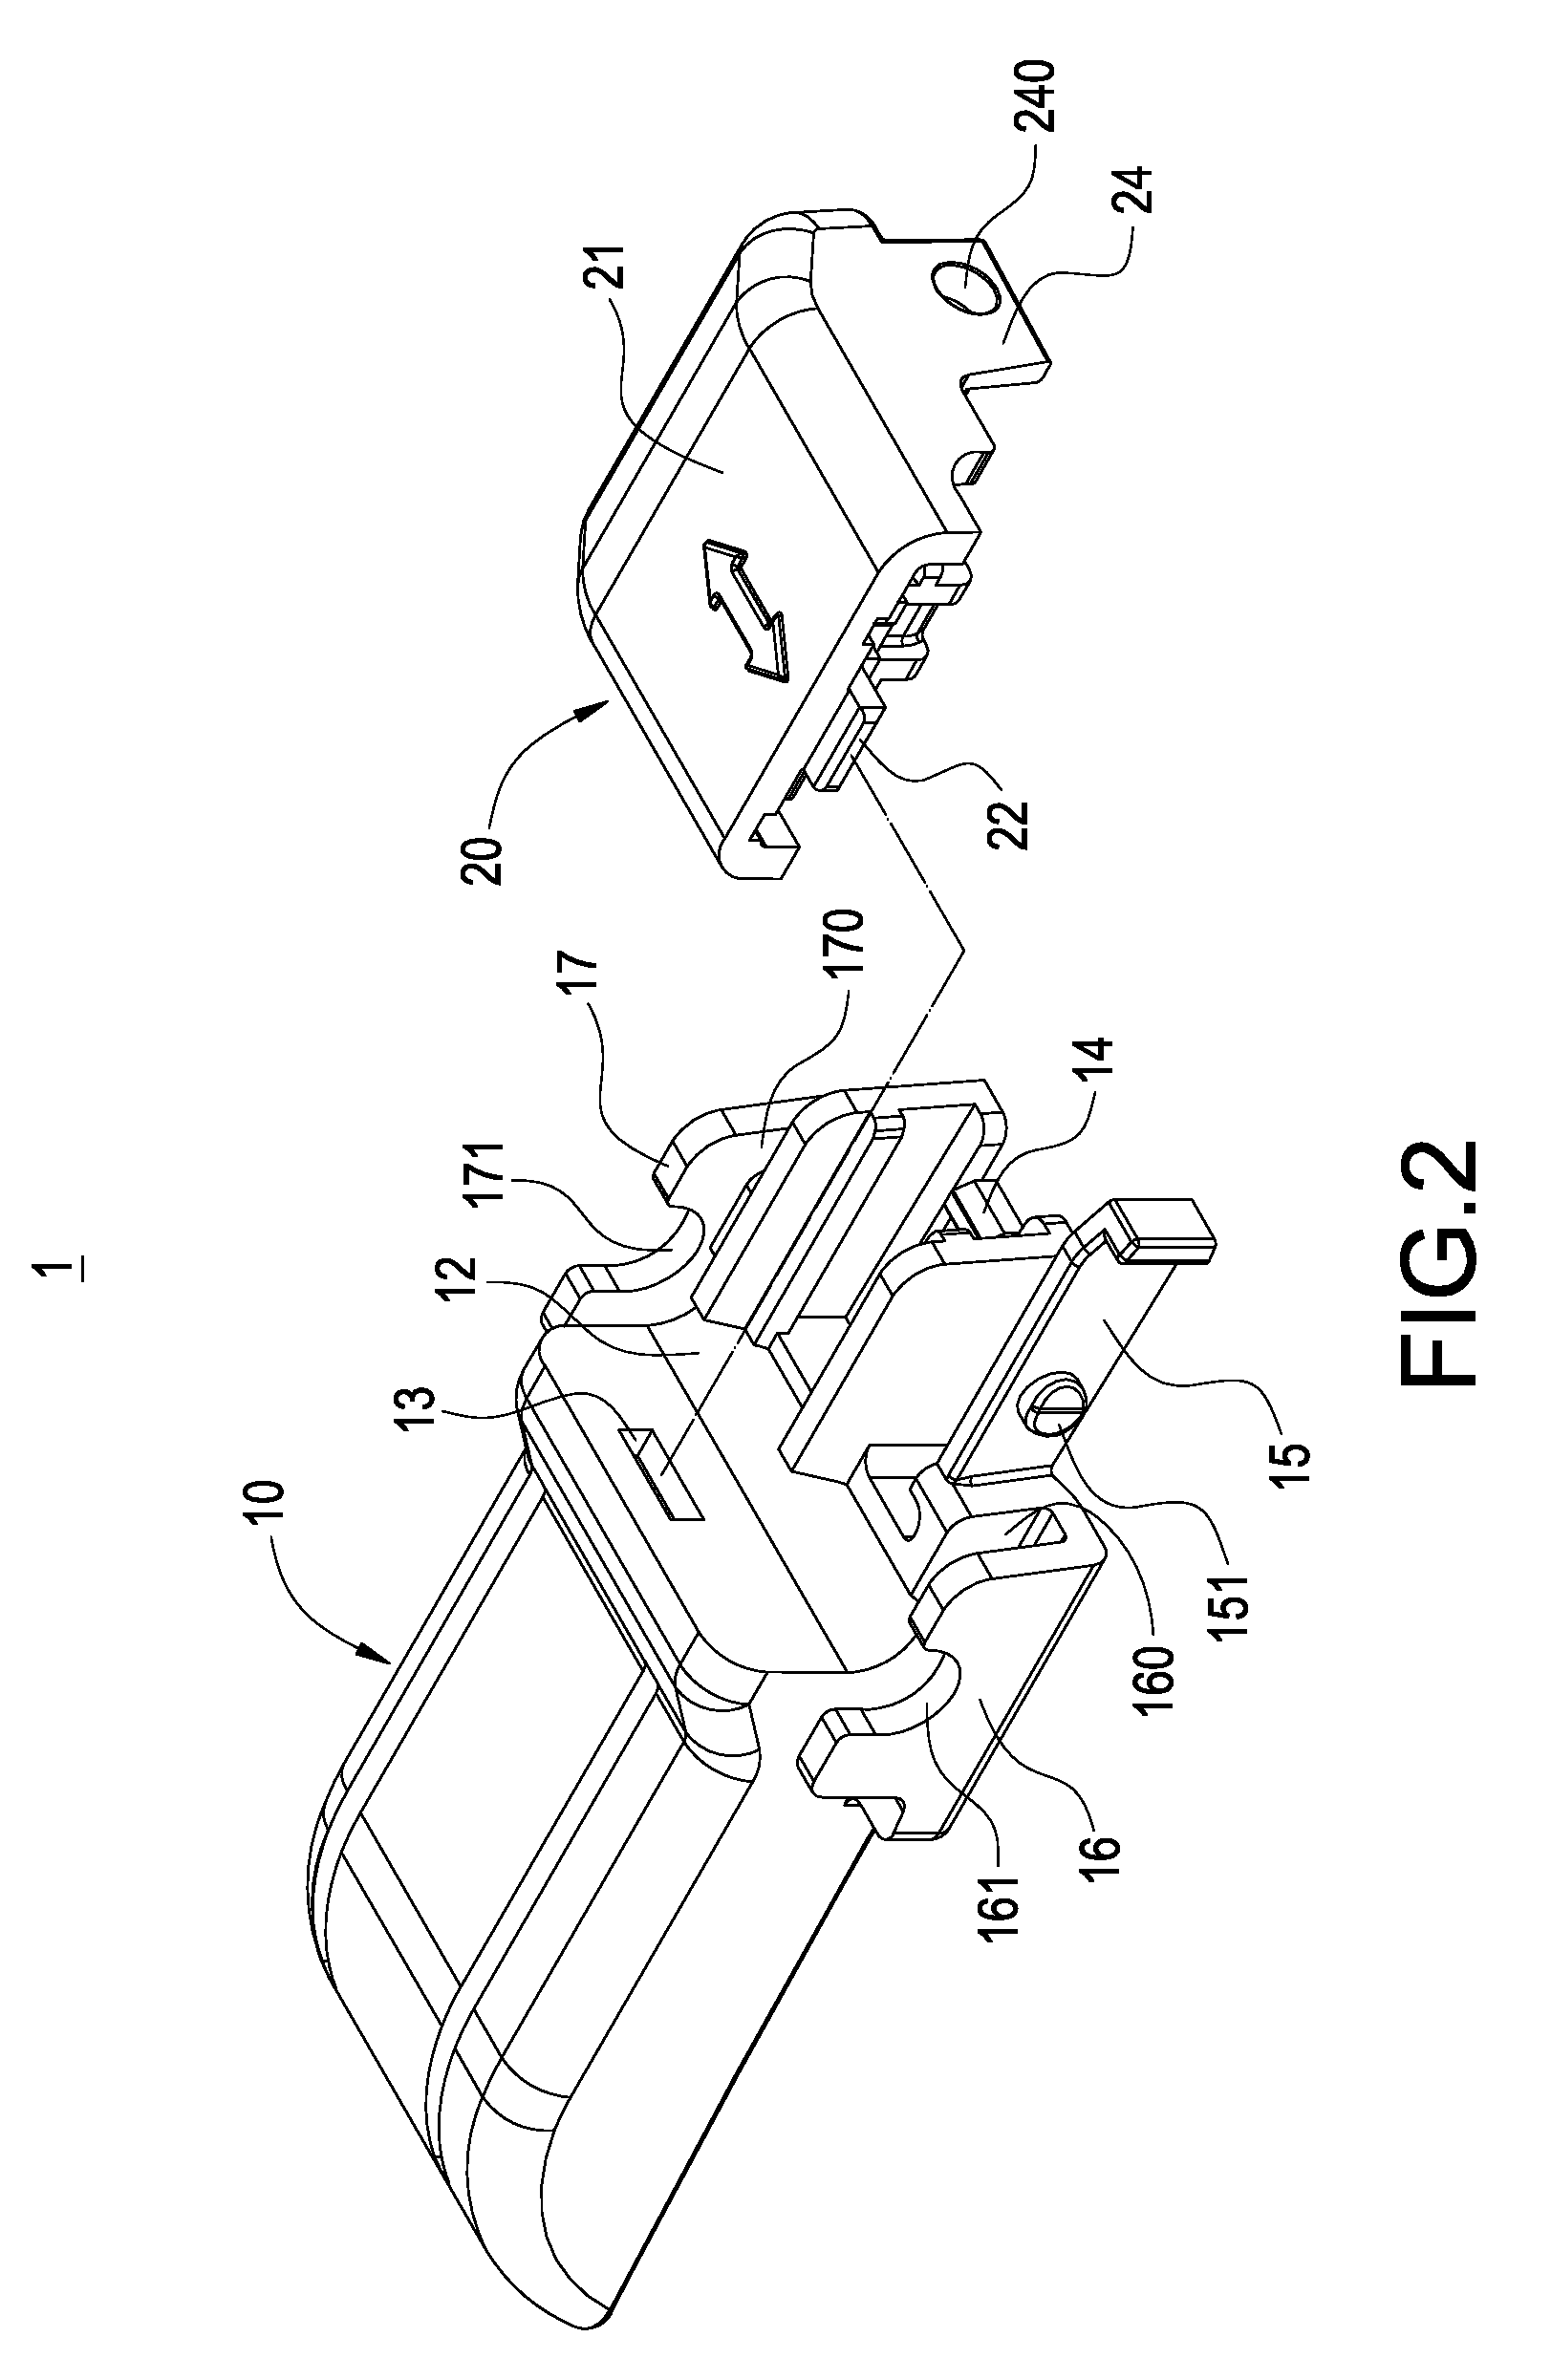 Windshield wiper combining assembly of combining driven wiper arm